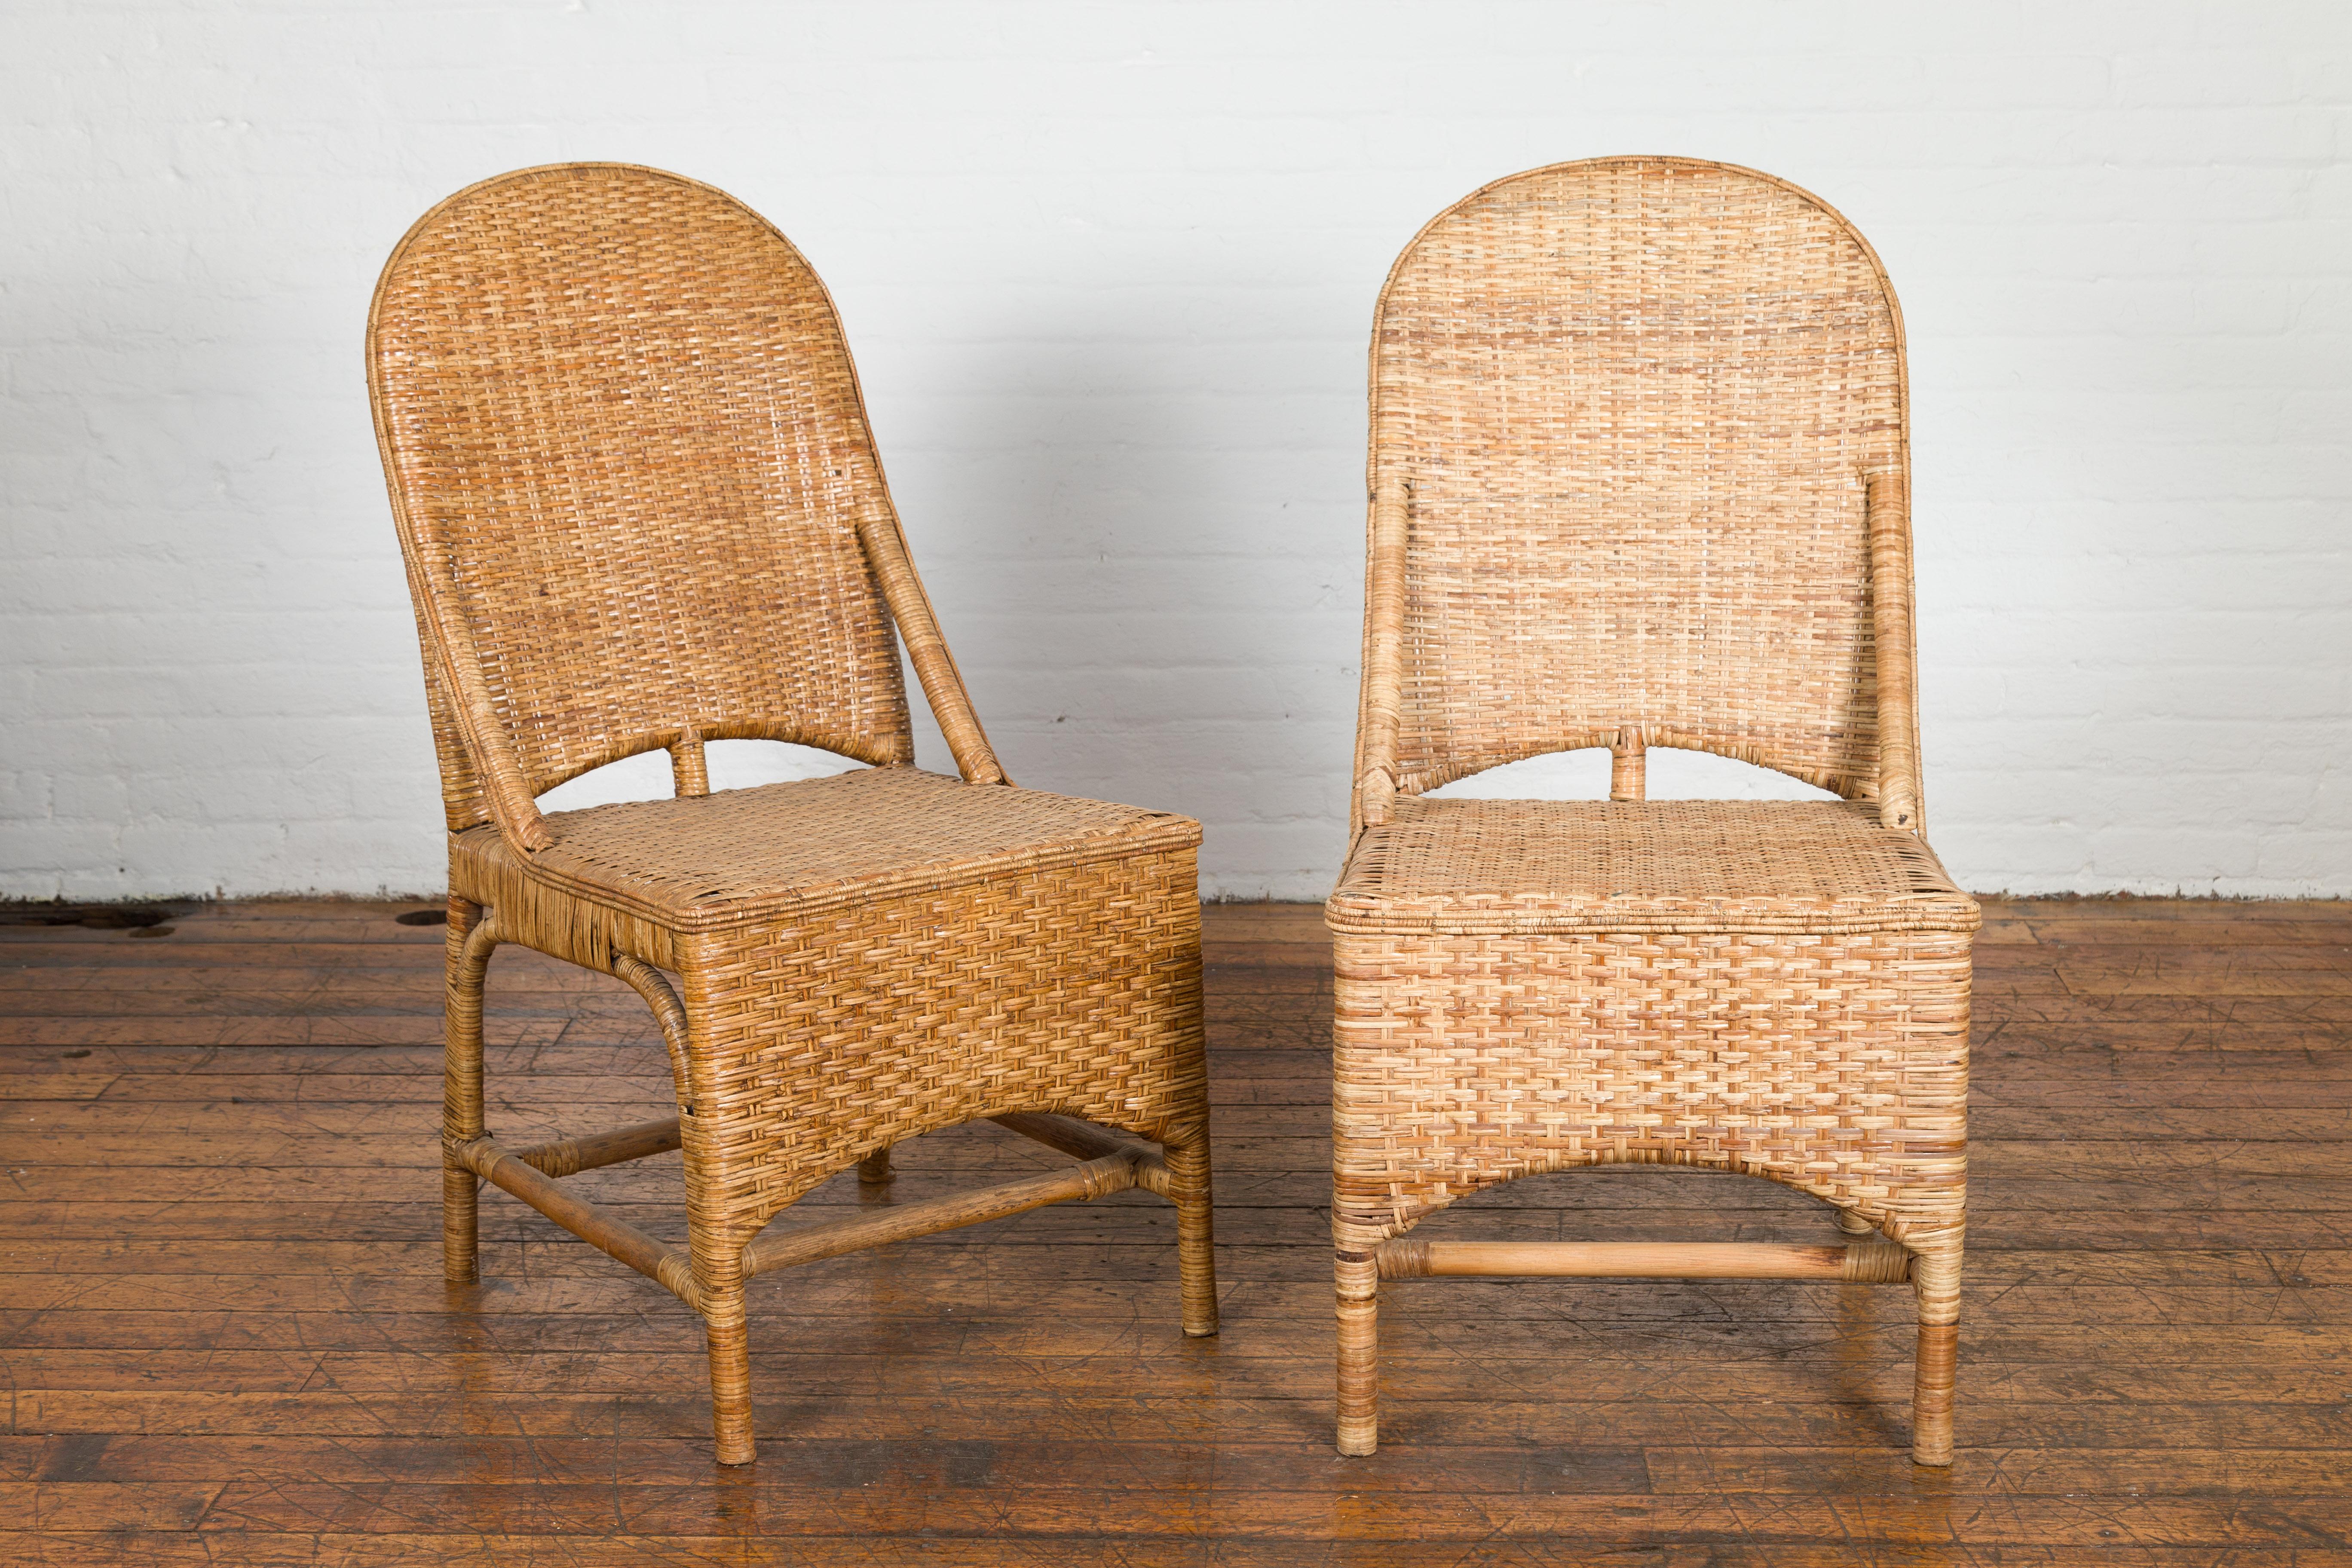 Two vintage Country style Thai hand woven rattan chair from the mid 20th century, with arching backs and H-Form cross stretchers. Embrace a fusion of functionality and earthy aesthetics with these vintage, mid-20th-century Thai rattan chairs.